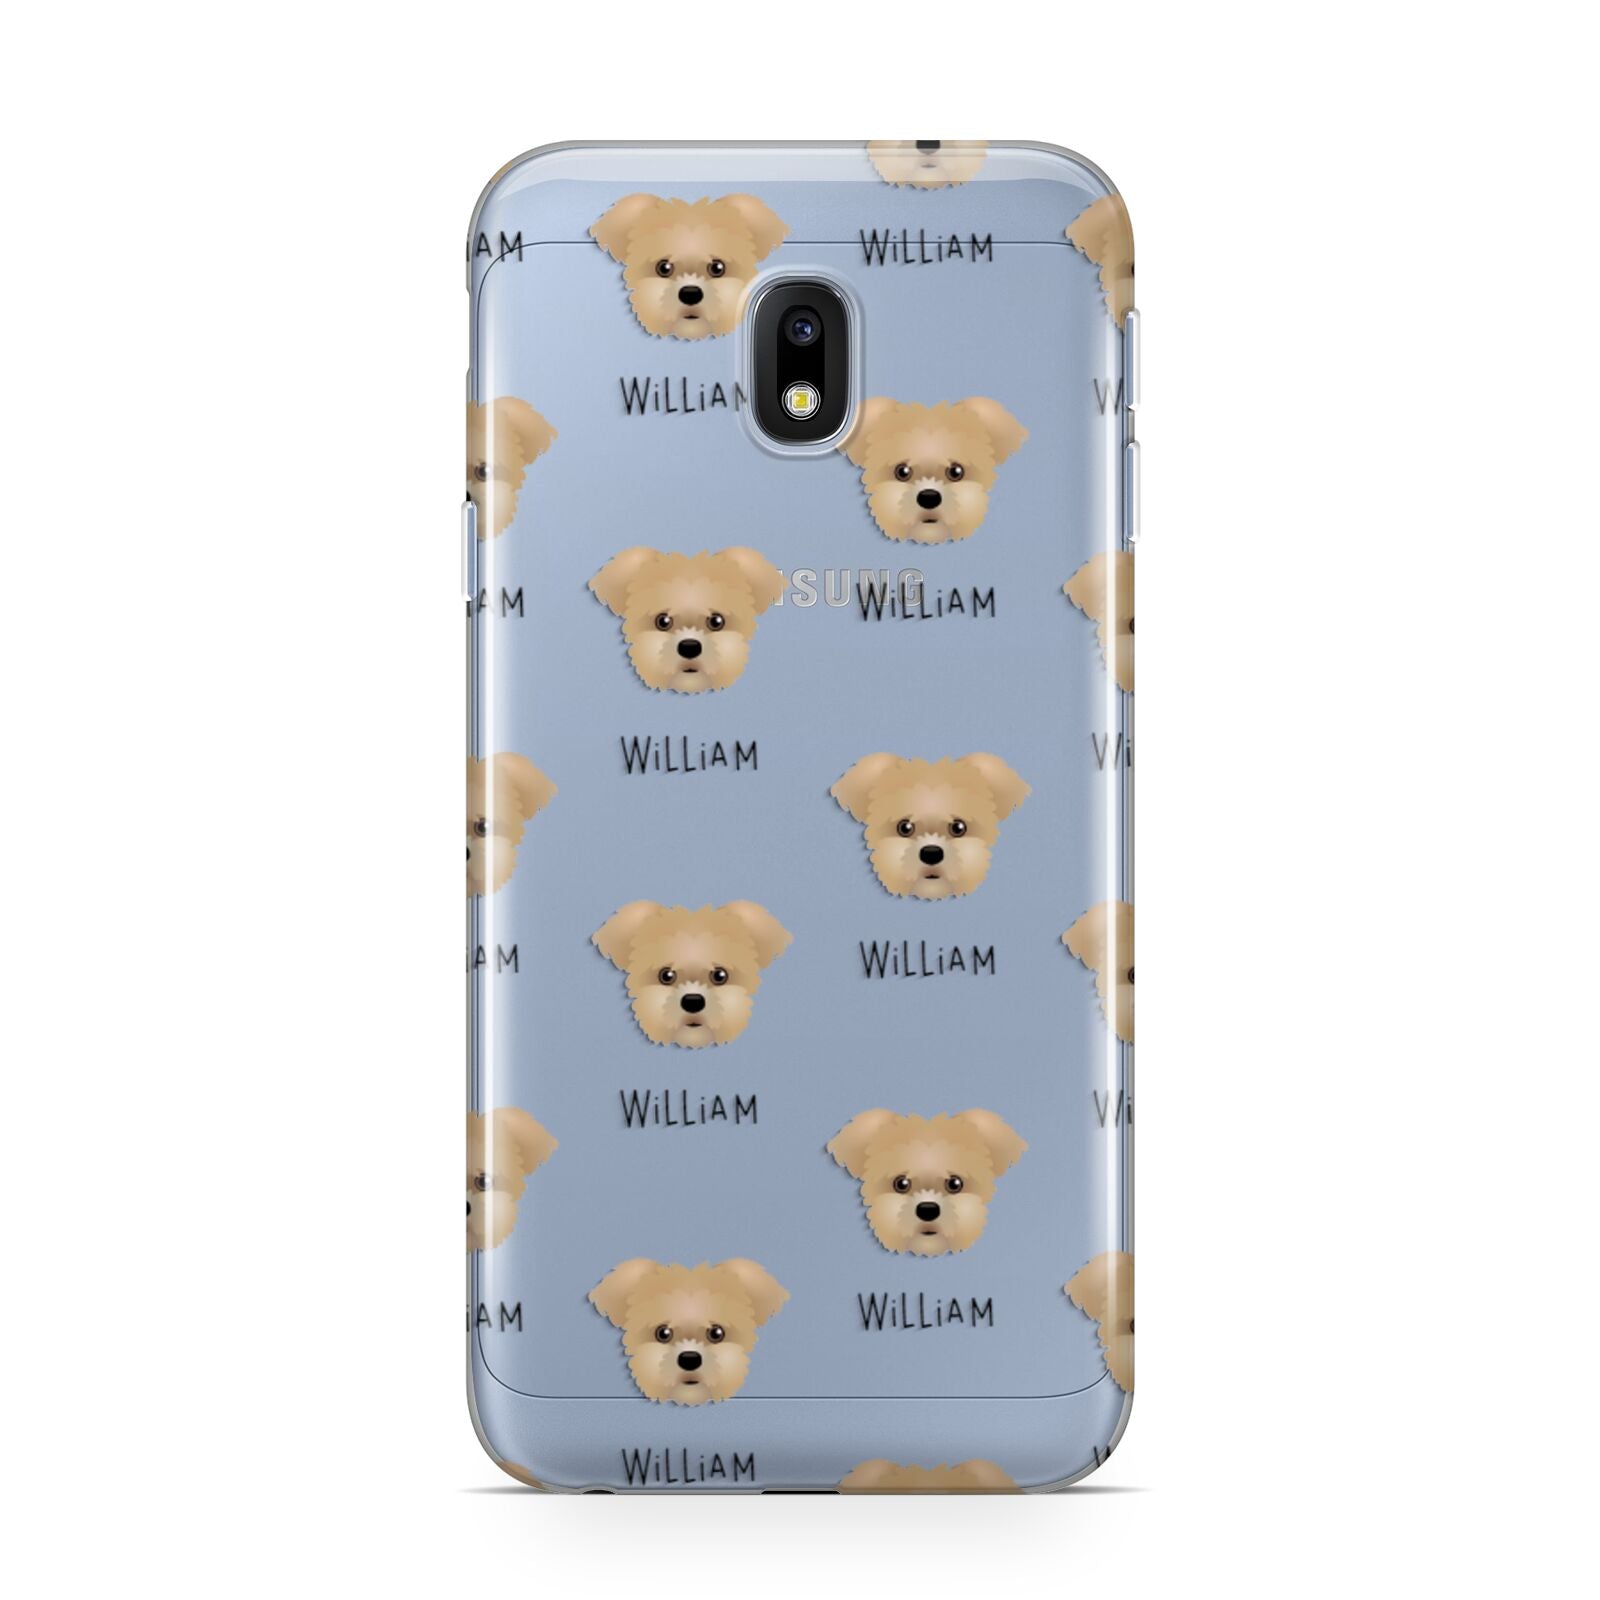 Morkie Icon with Name Samsung Galaxy J3 2017 Case